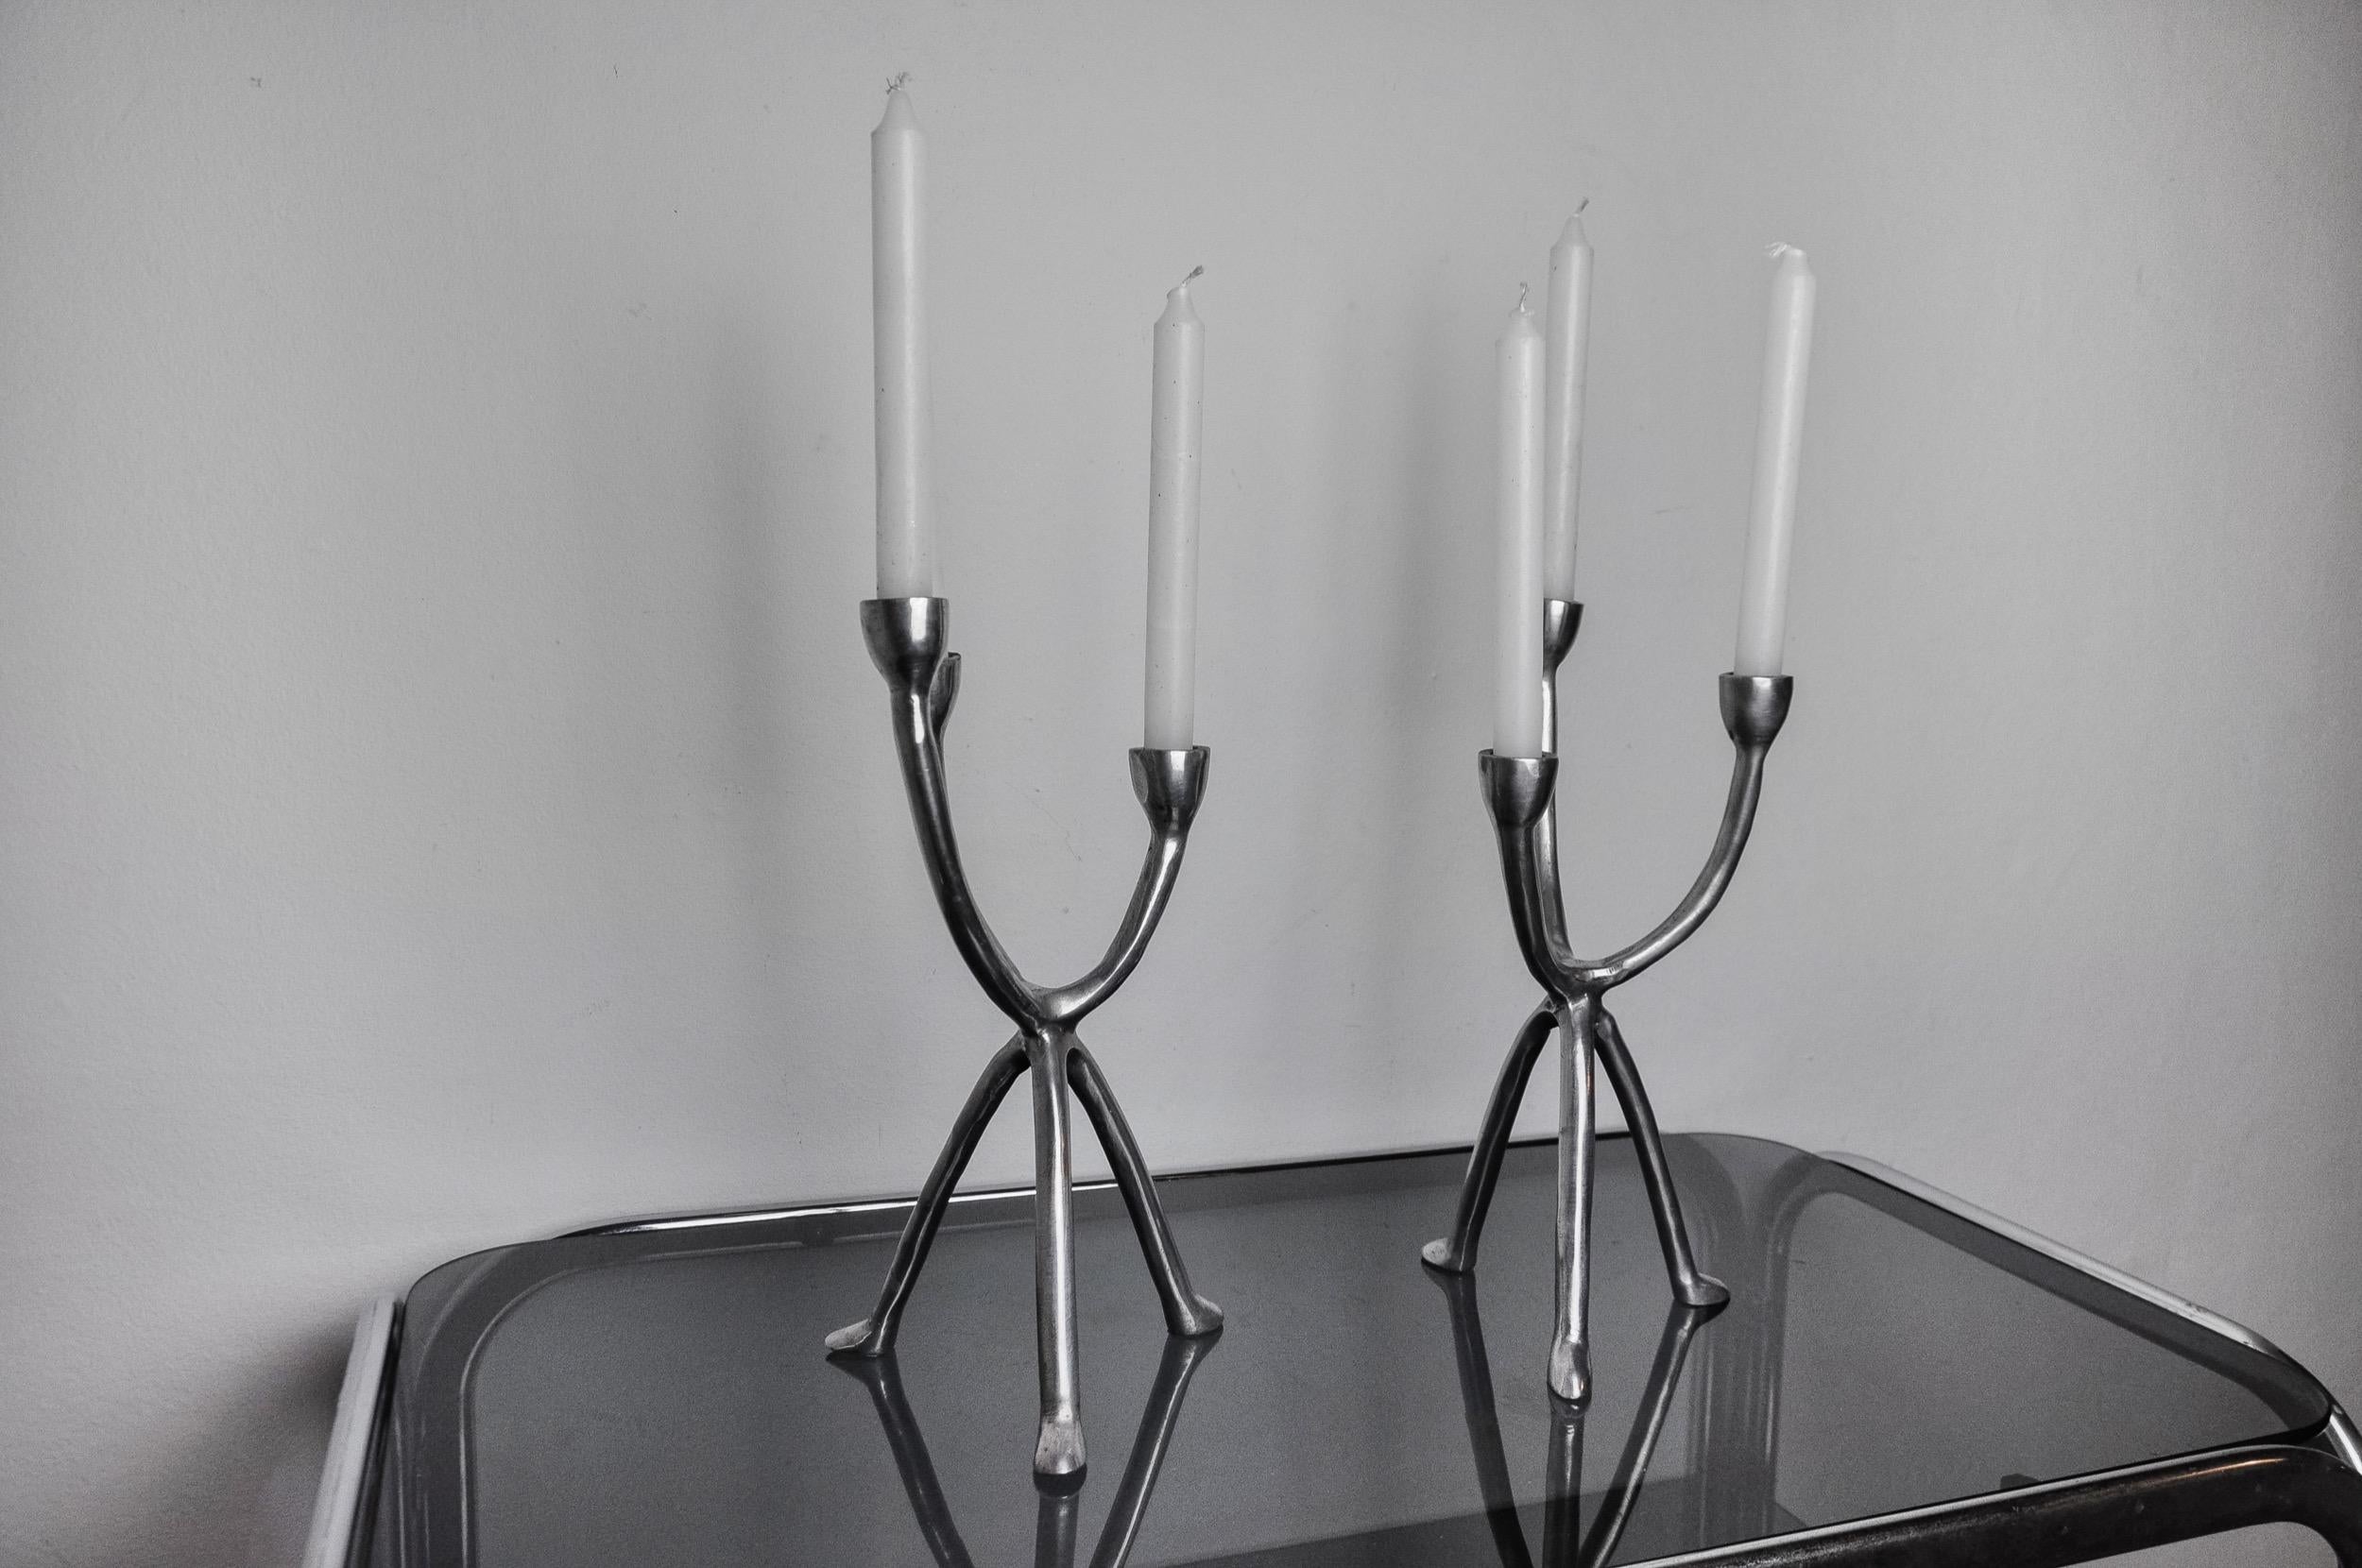 Metal Pair of Brutalist Candlesticks 3 Arms, Denmark, 1970 For Sale